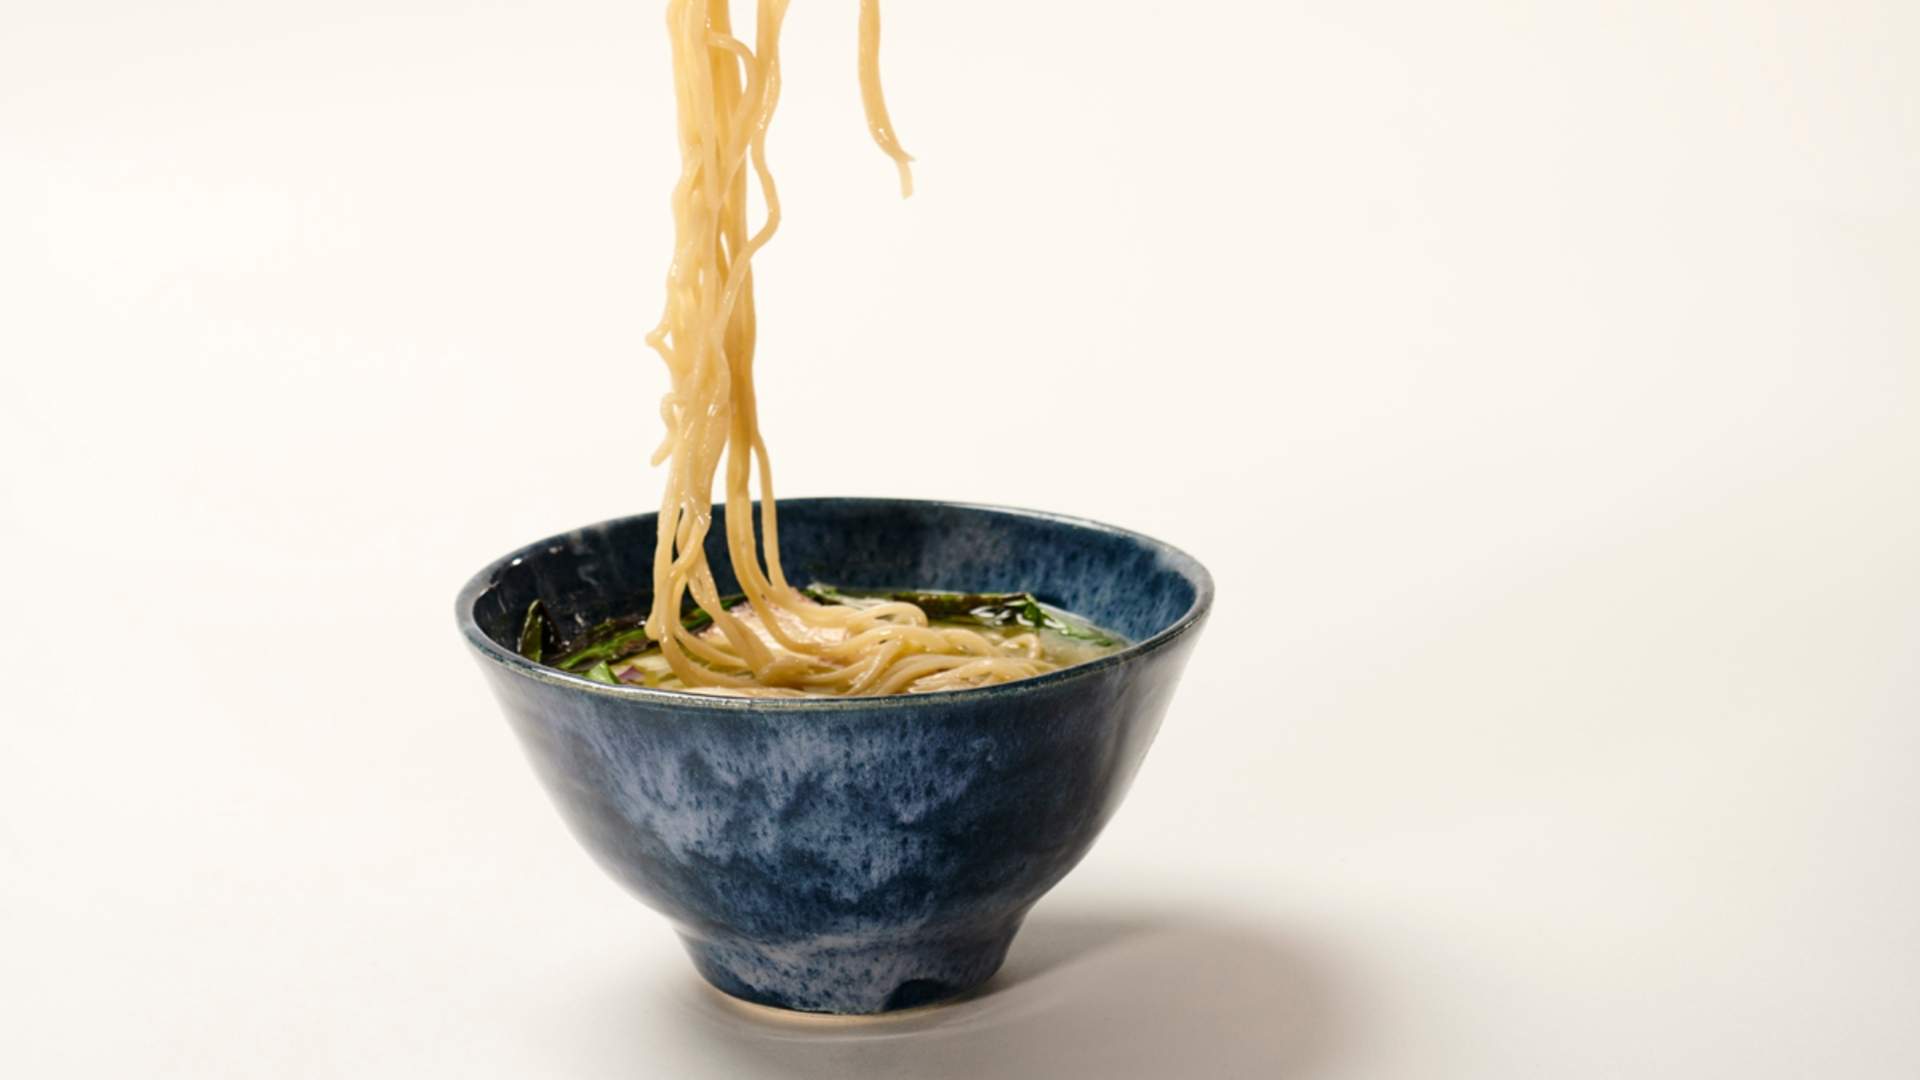 Gomi Boys Is Melbourne's New Food Service Delivering Ready-to-Heat Ramen Kits